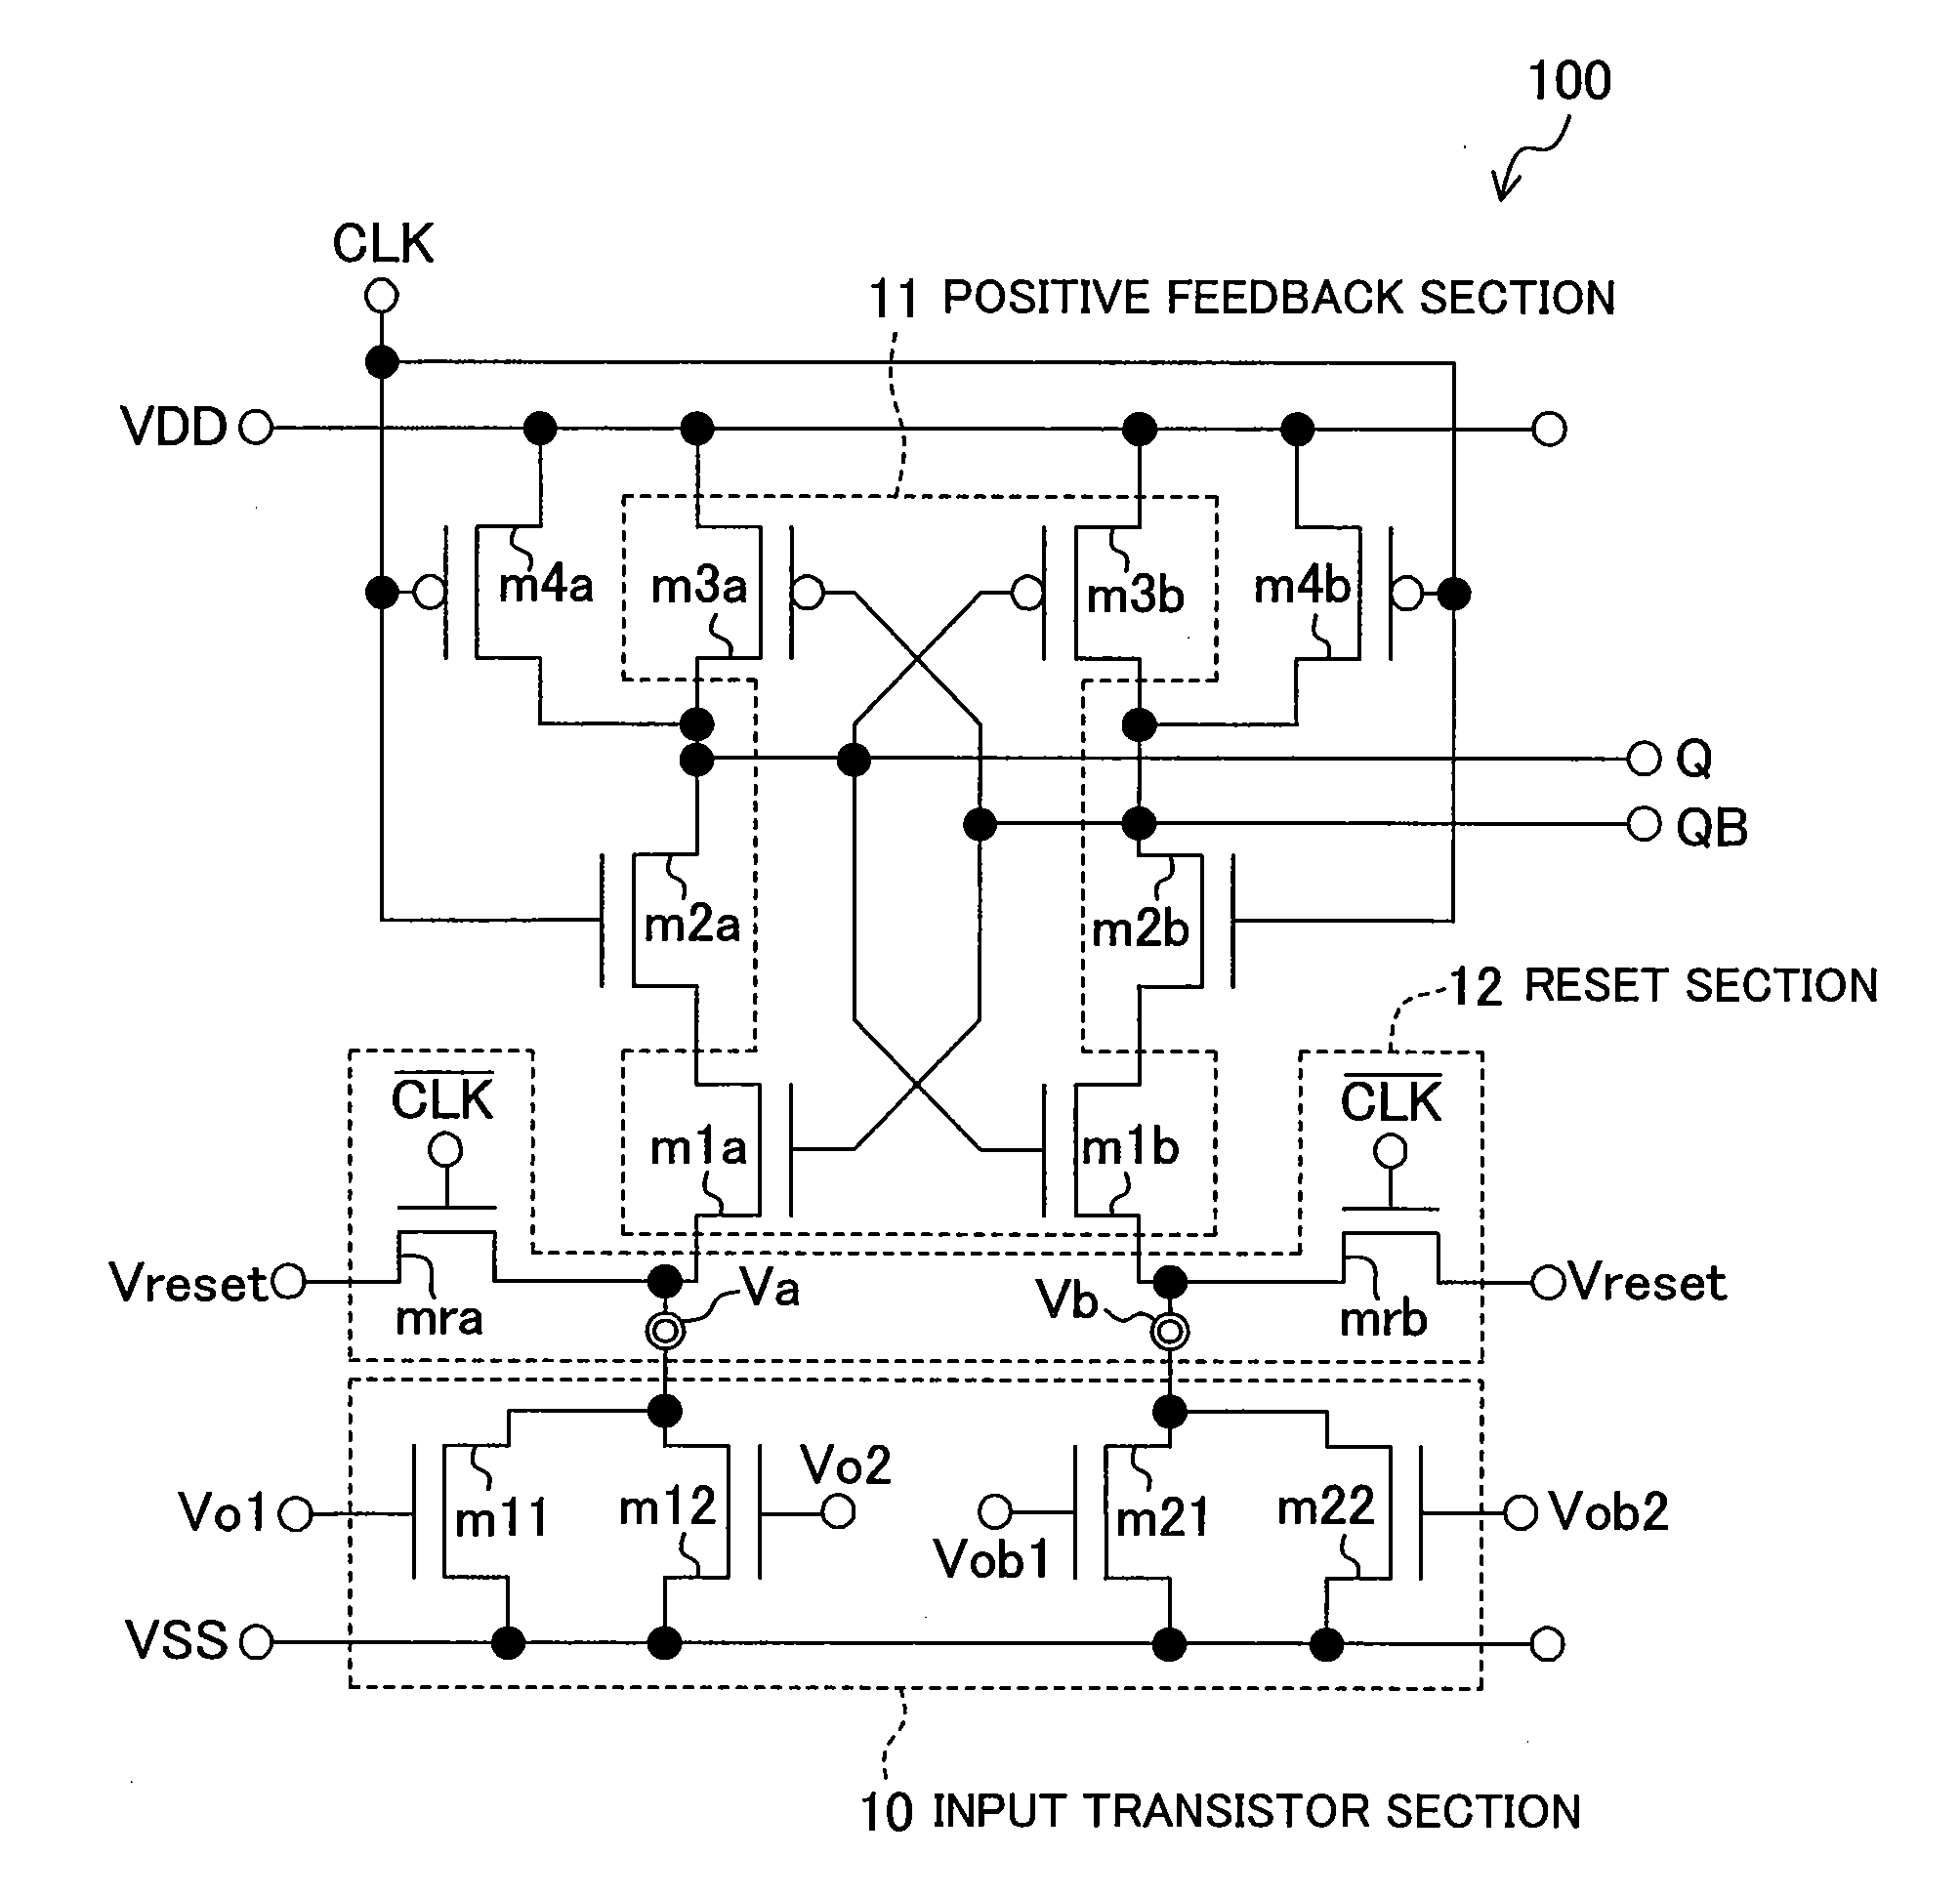 Comparator and a/d converter